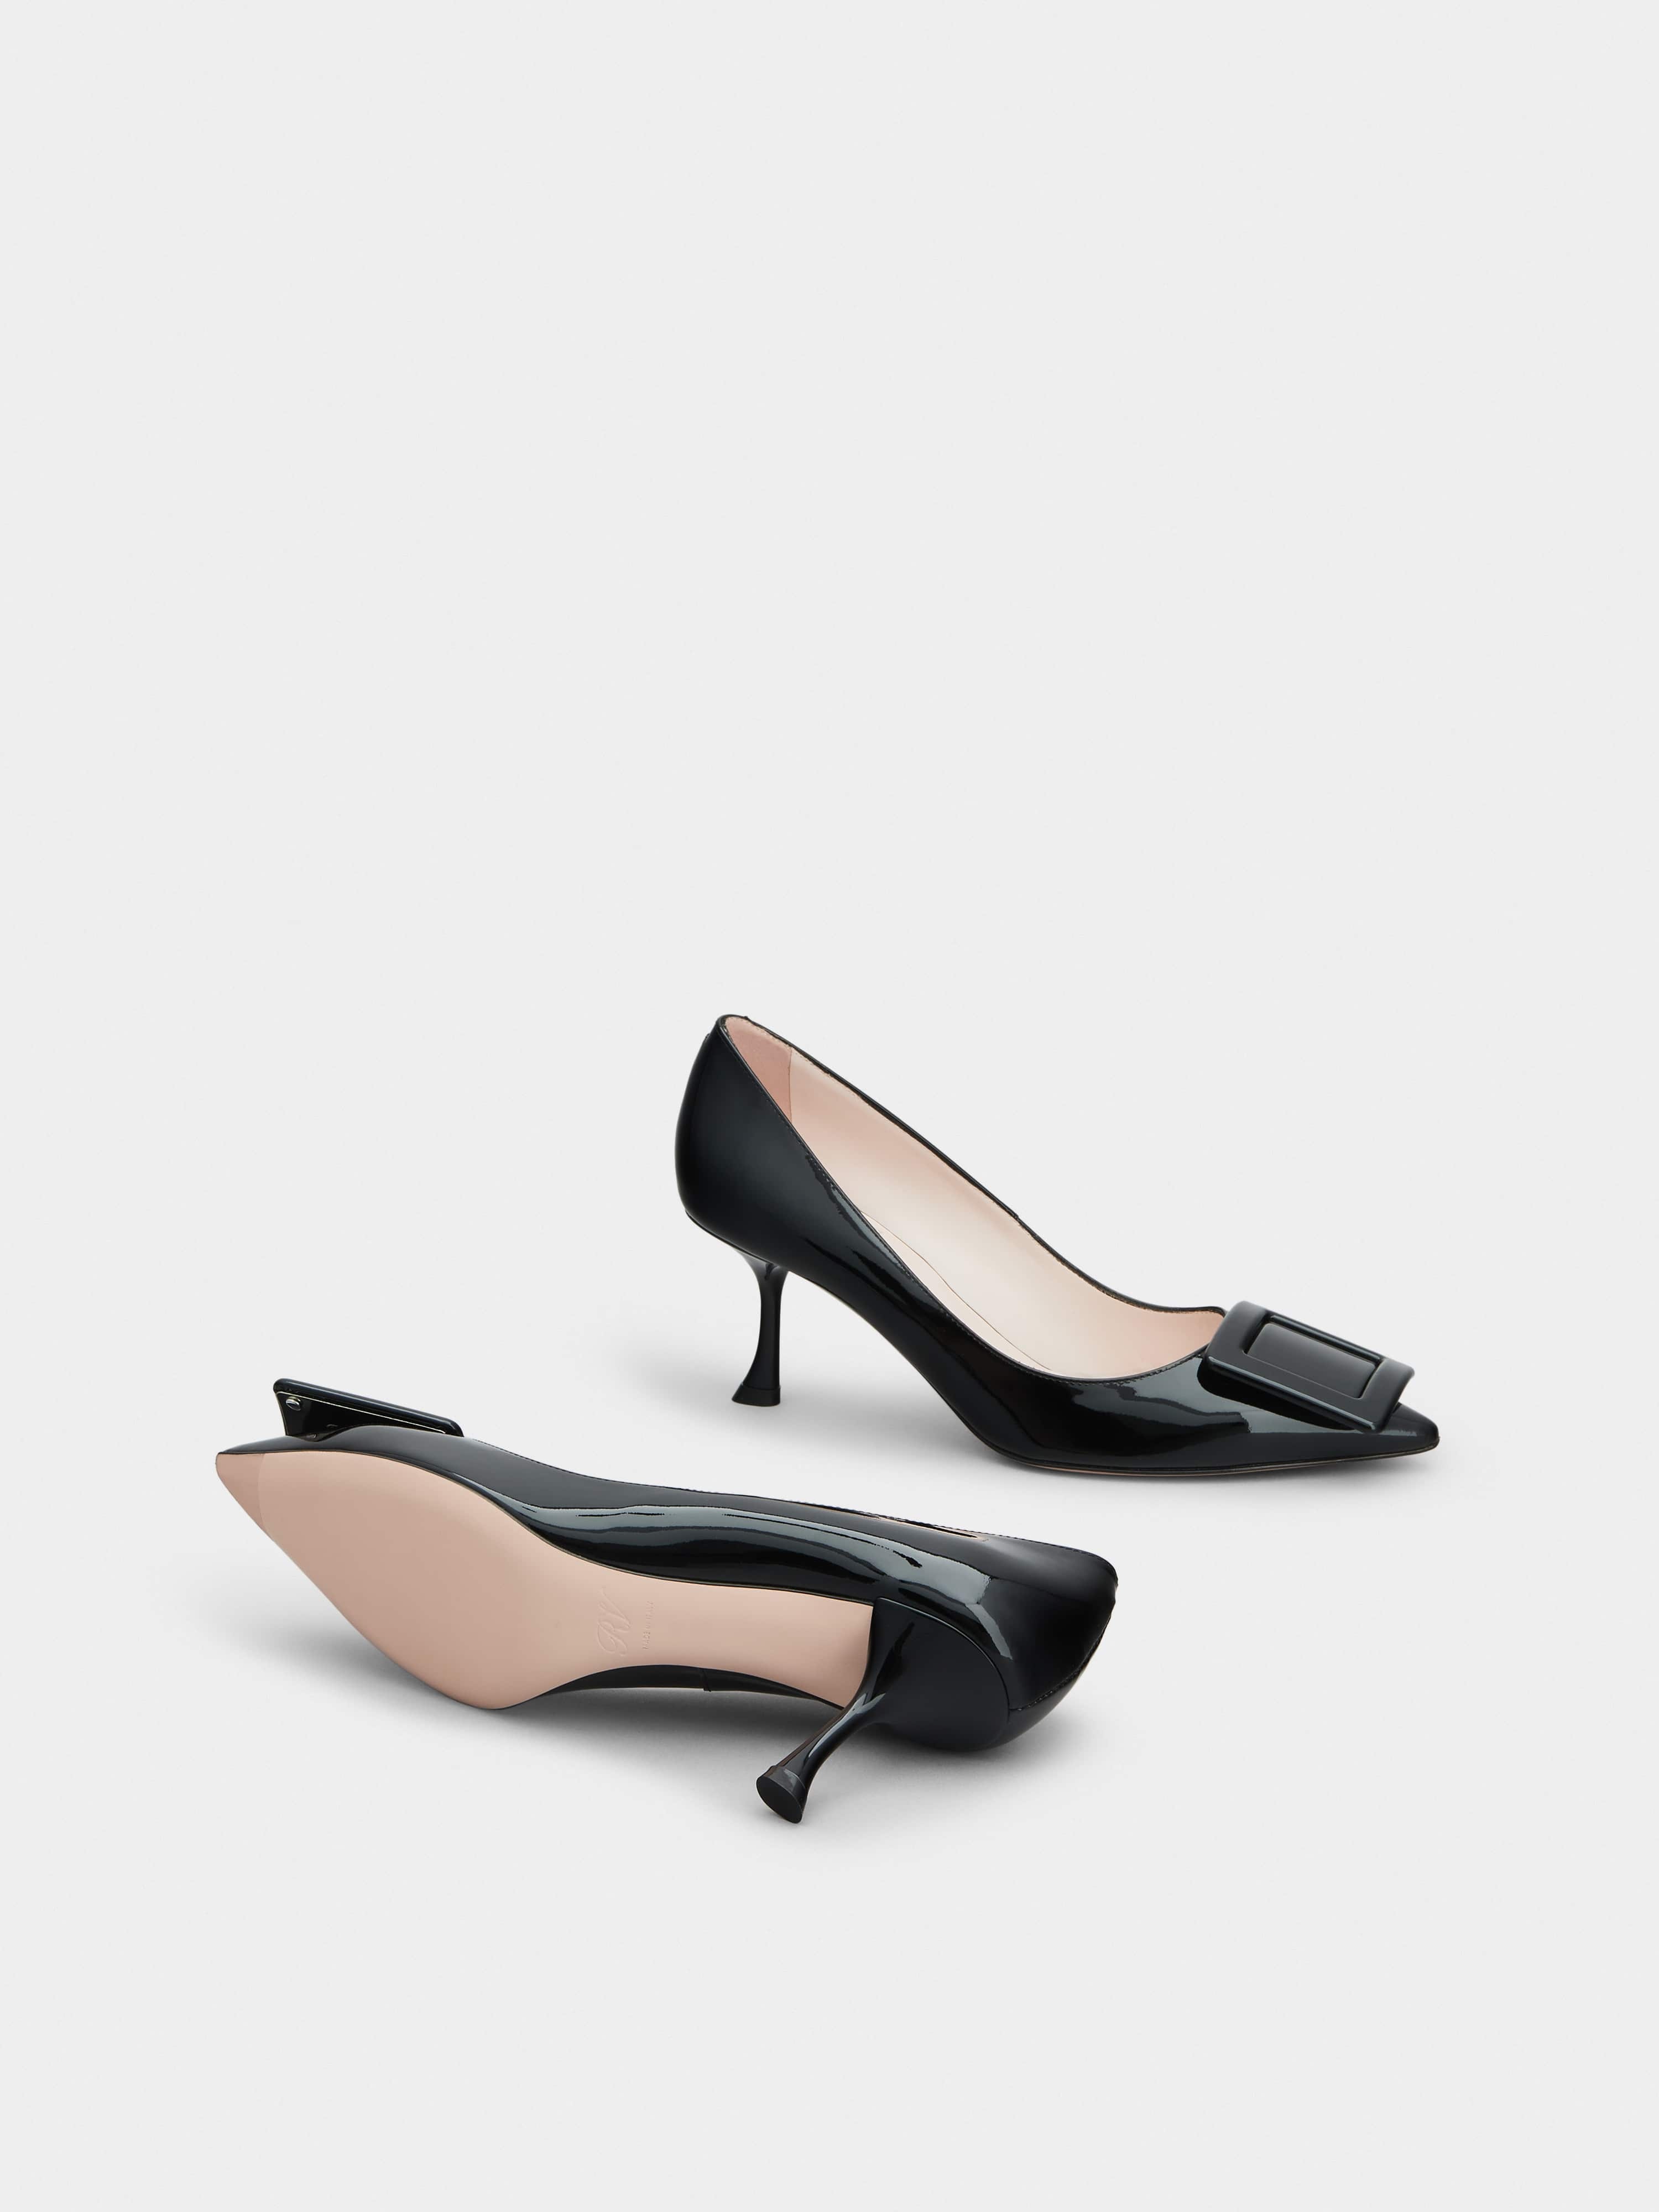 Roger Vivier Viv' In The City Pumps in Patent Leather